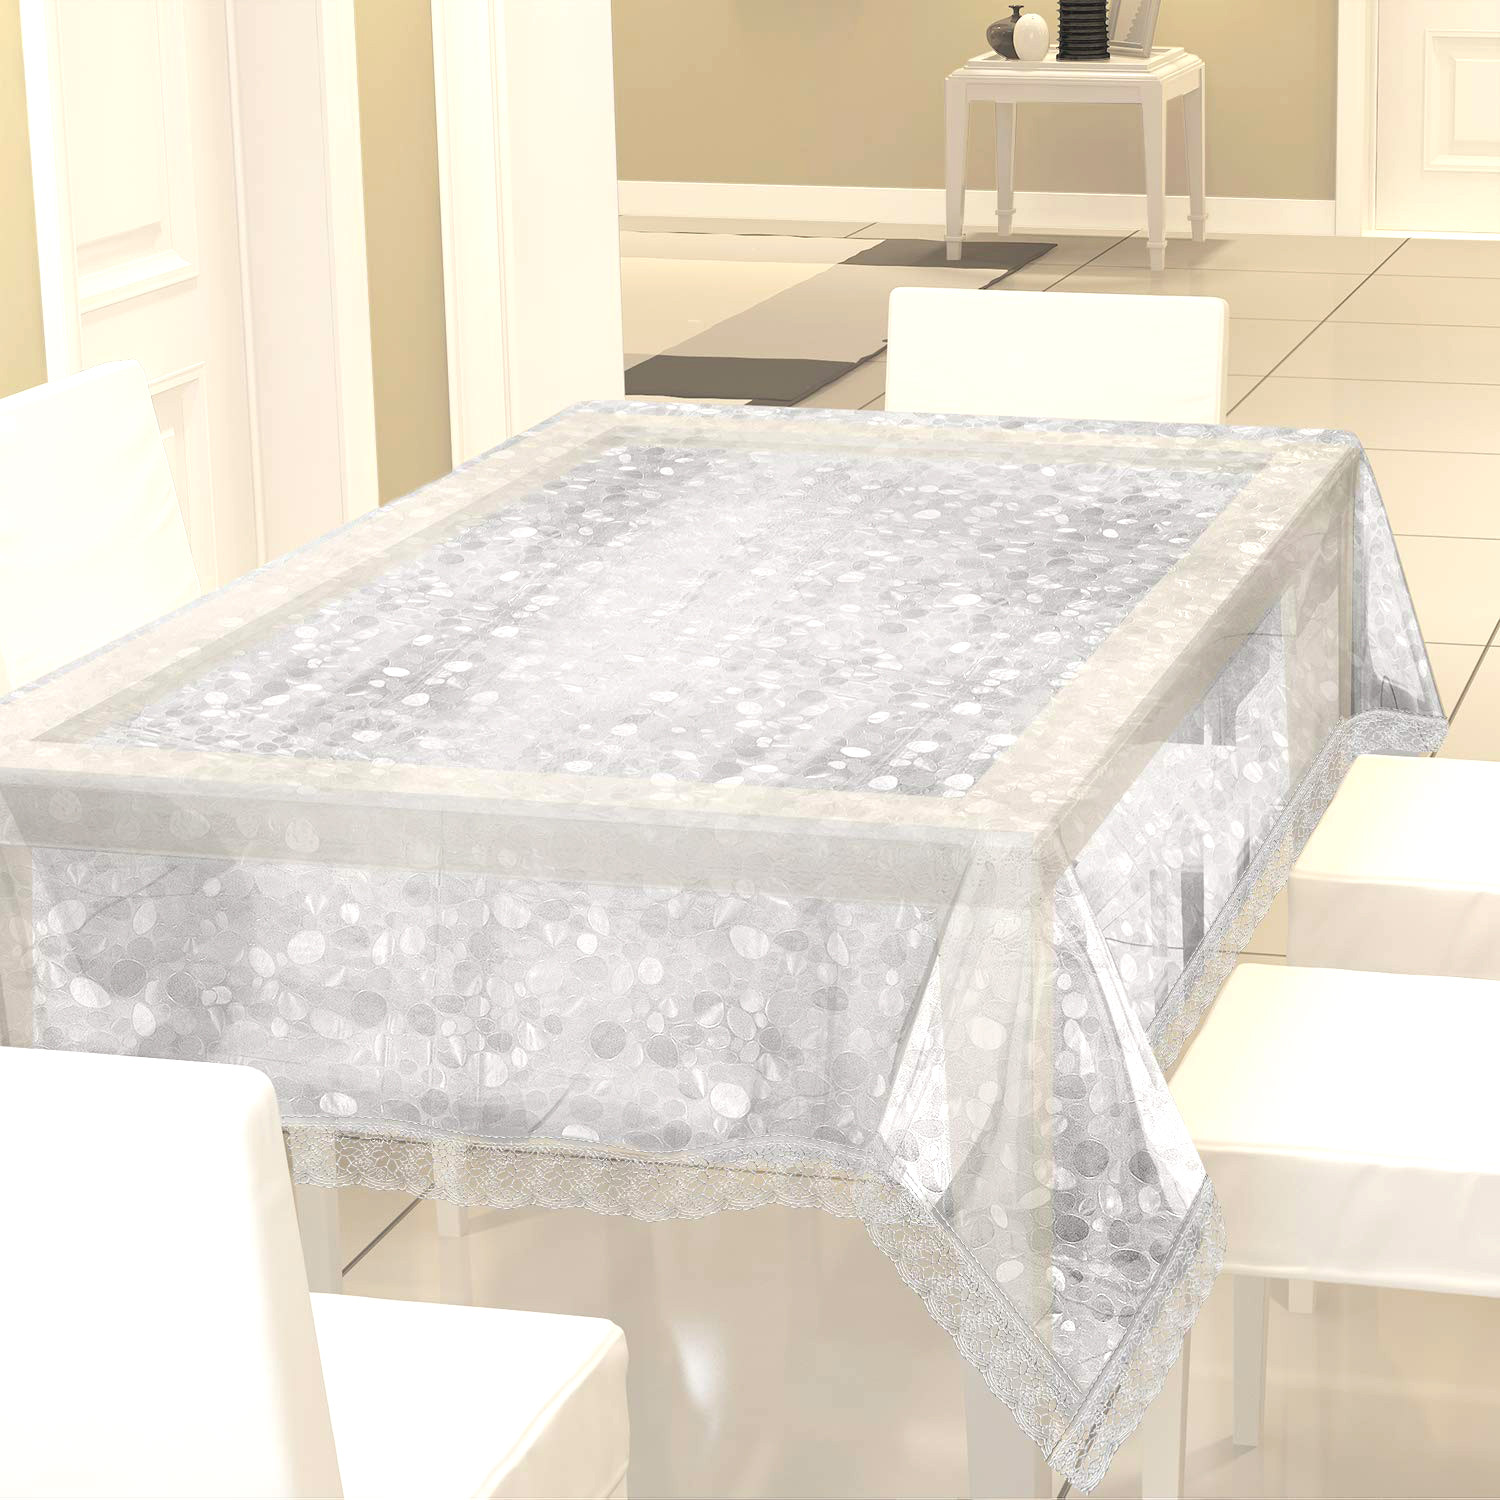 Kuber Industries 3D Design PVC 6 Seater Center Table Cover 60